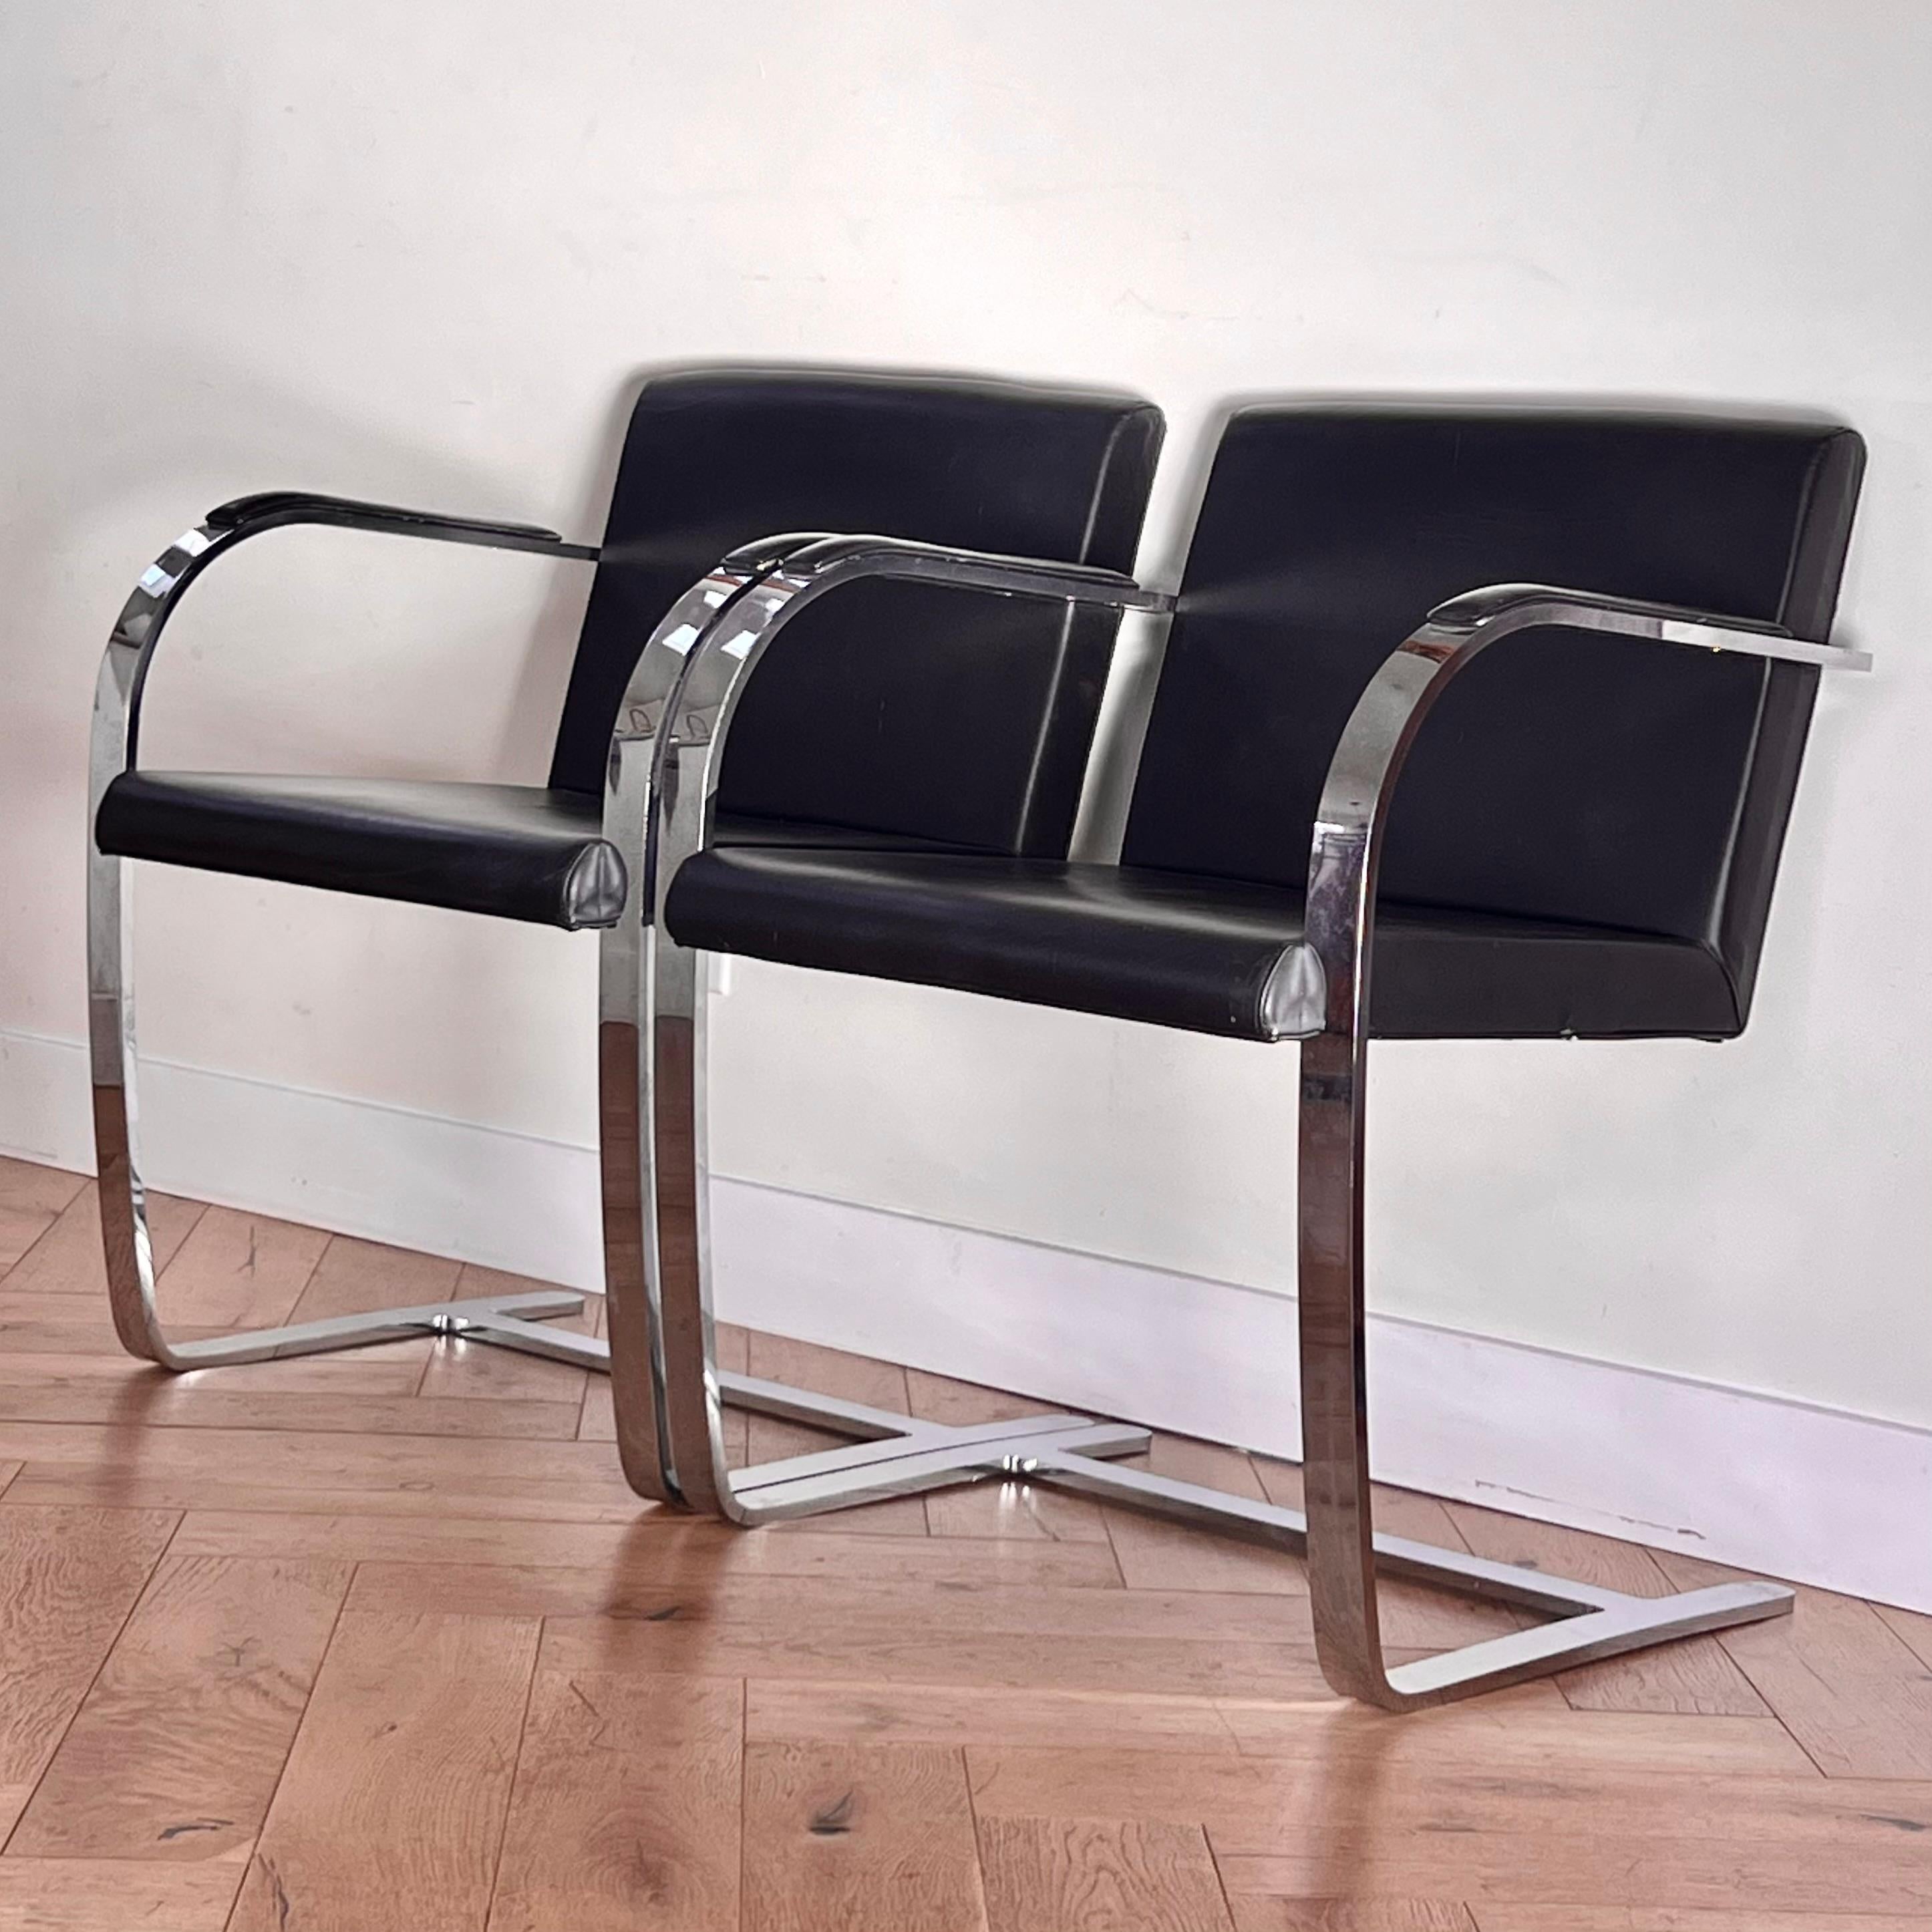 A pair of Brno flat arm chairs in chrome and black leather, circa 1970s. Designed by Mies van der Rohe in 1930, these are authorized reproductions made according to the original specifications by Palazzetti Italy. Some signs of age, including